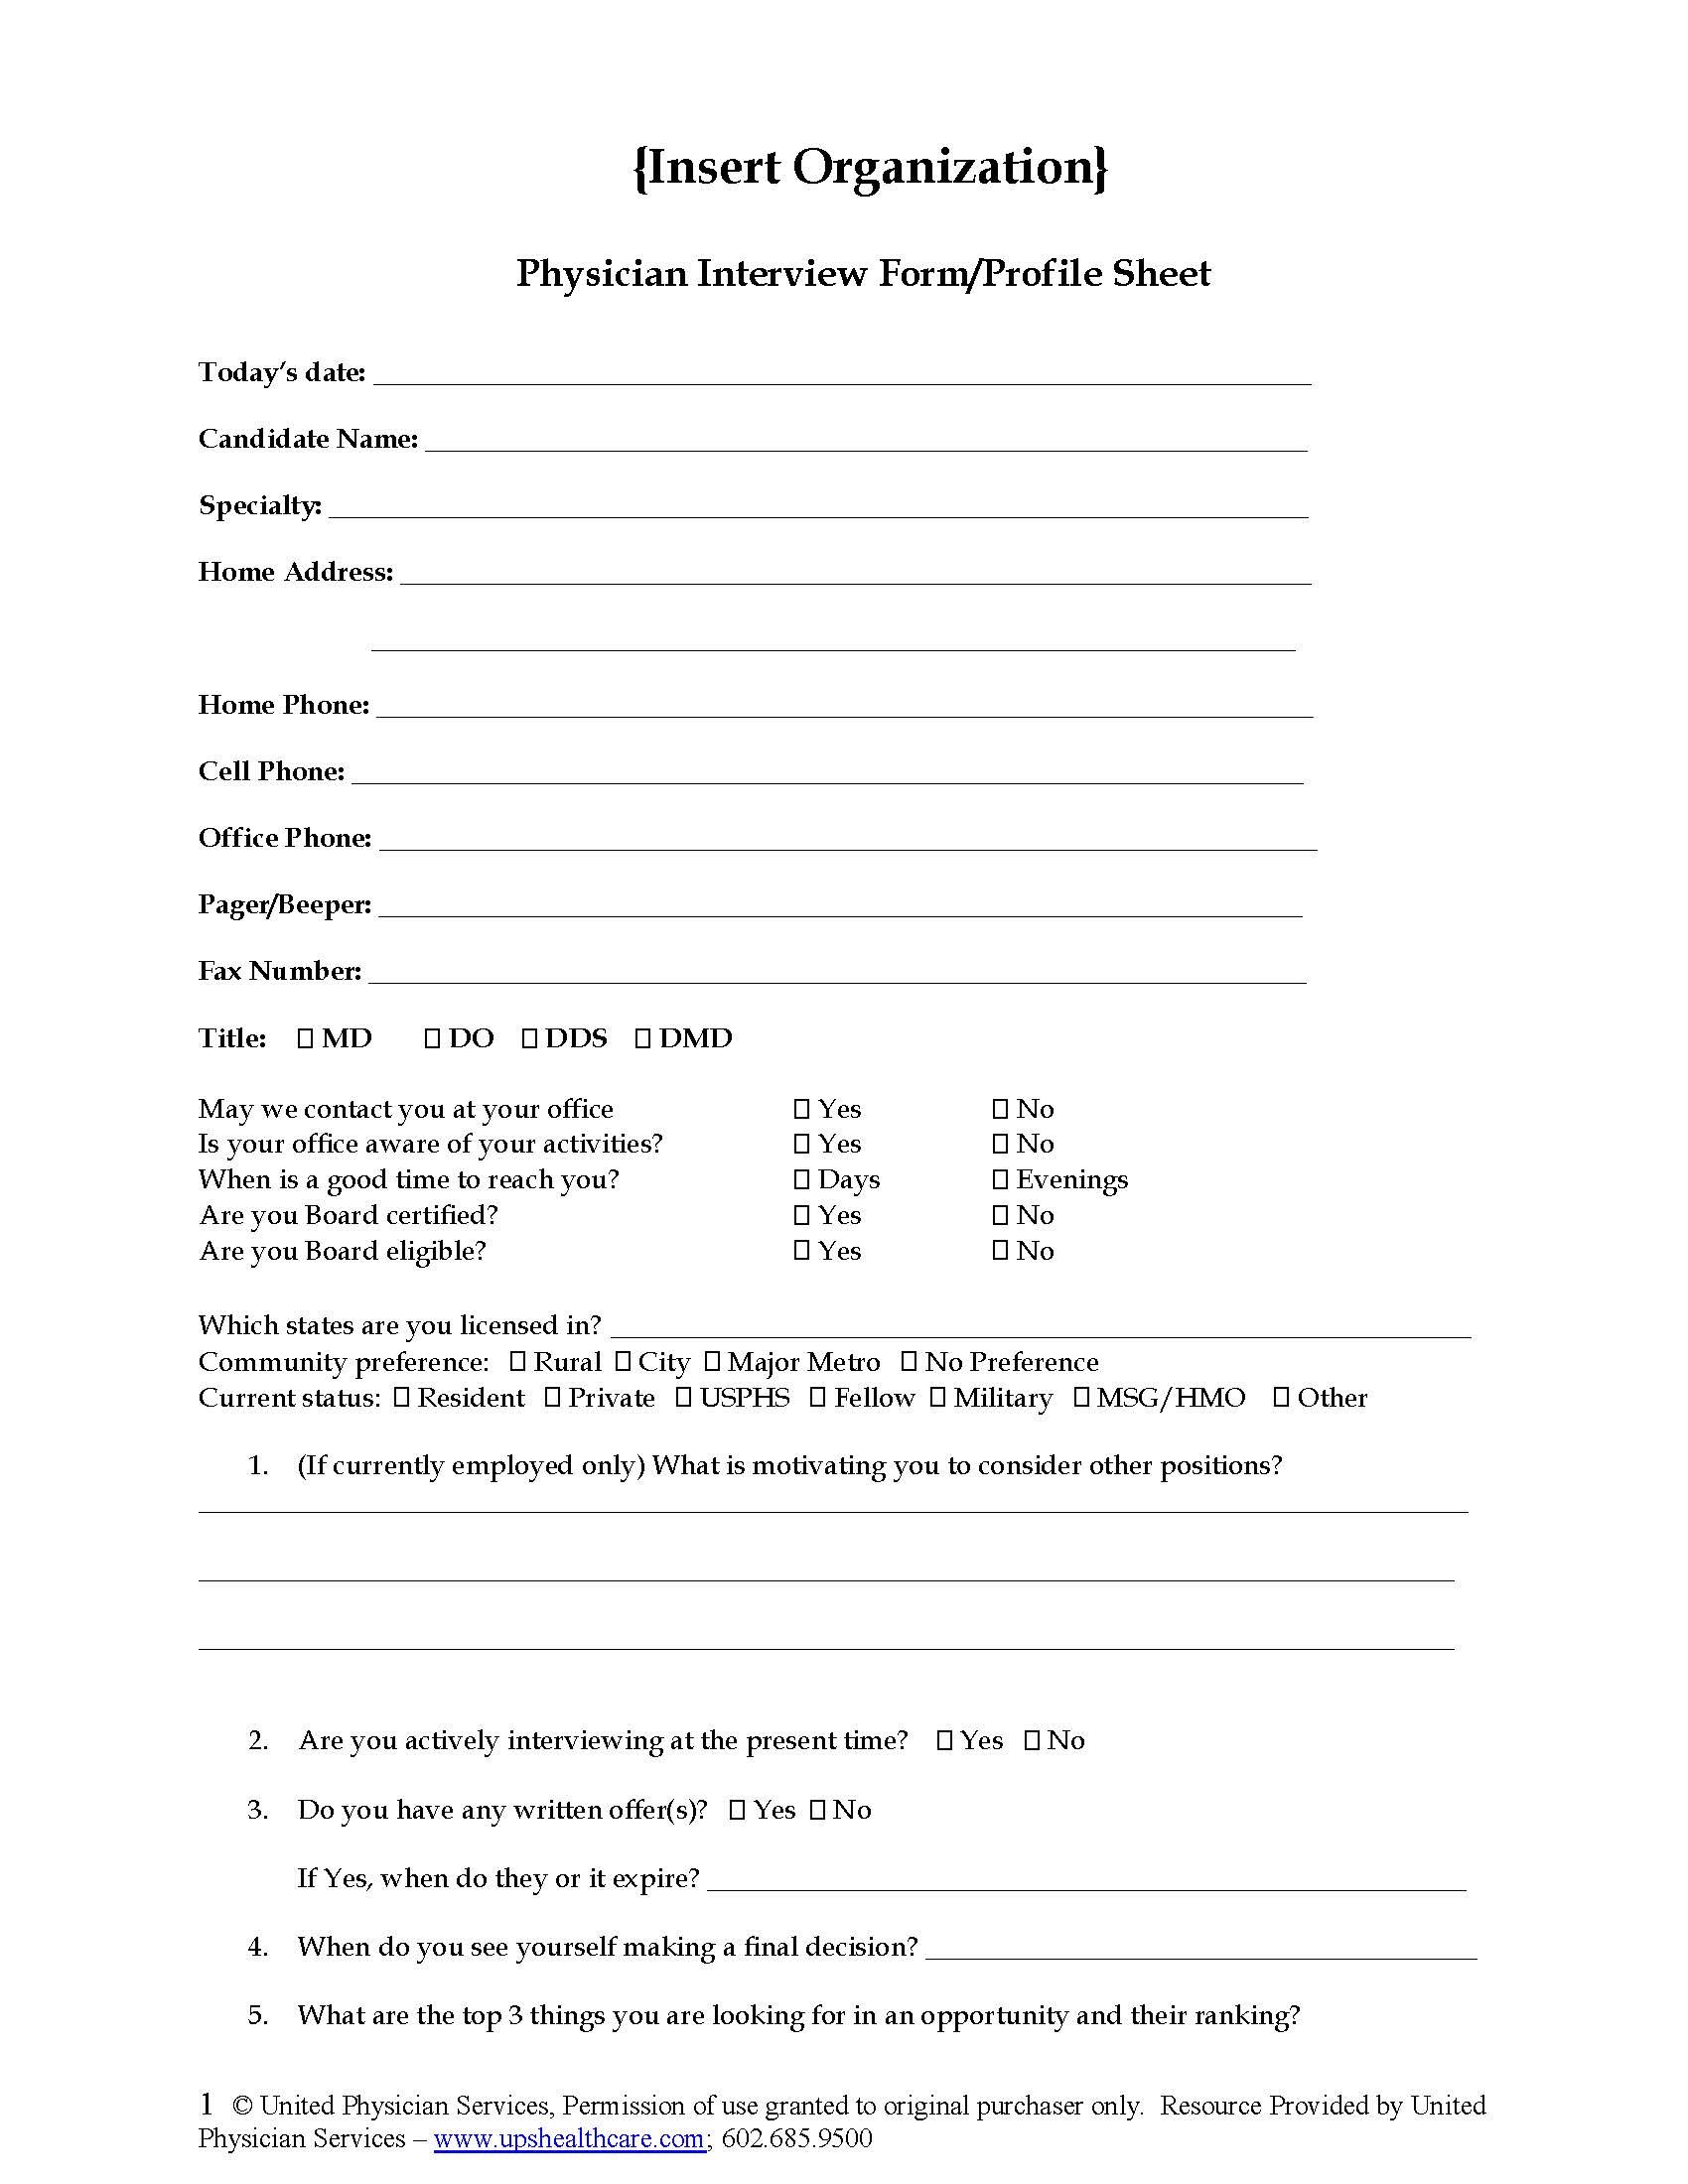 Physician Interview/Profile Form | United Physician Services